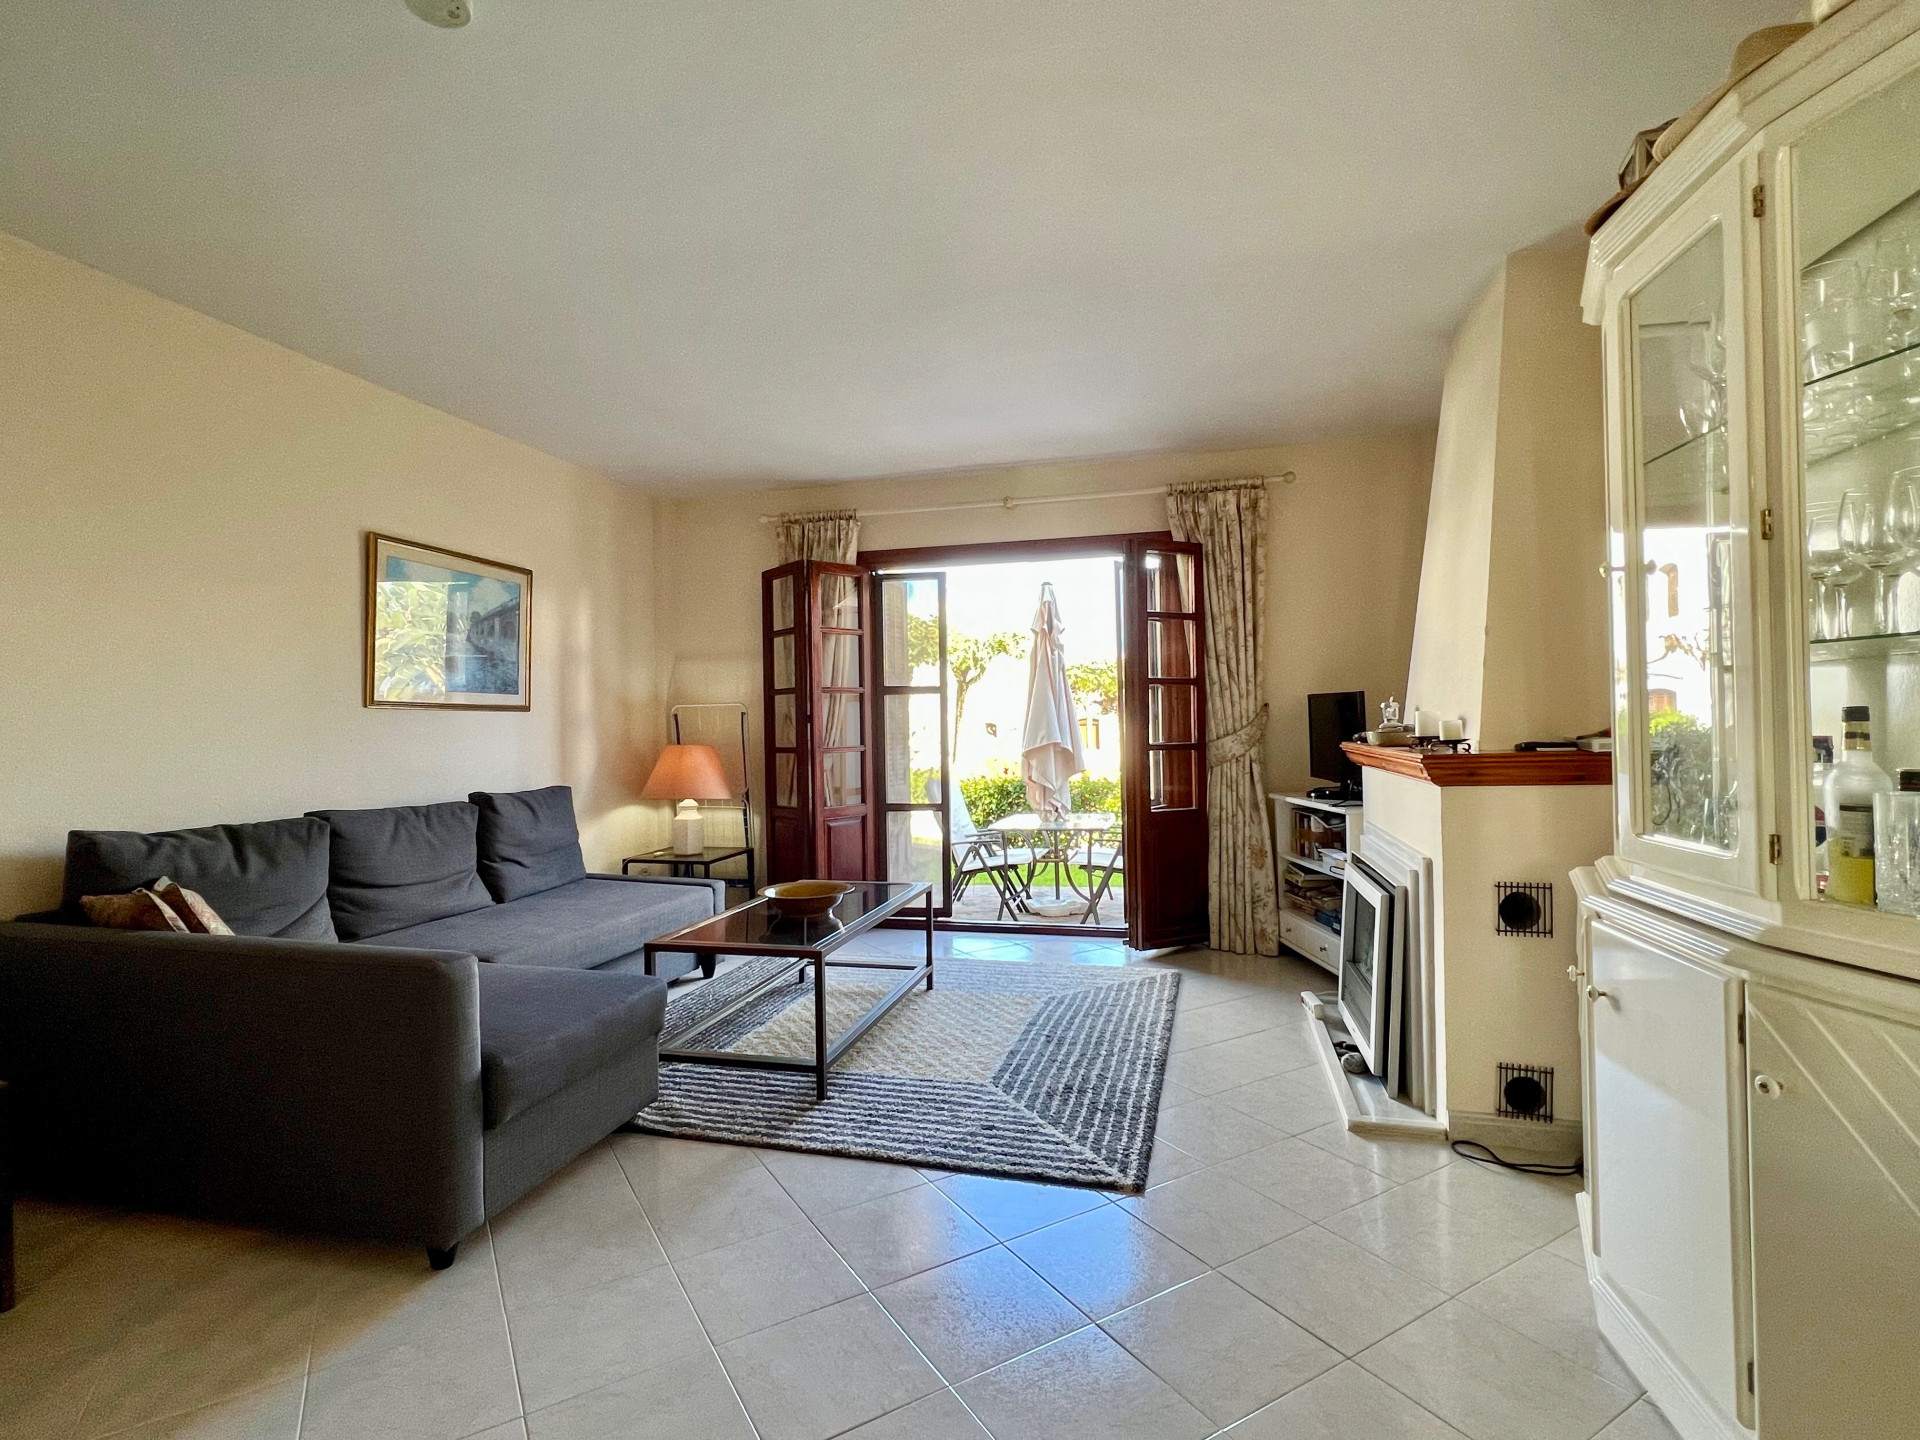 Lovely two bedroom townhouse in Costalita just a few steps from the beach